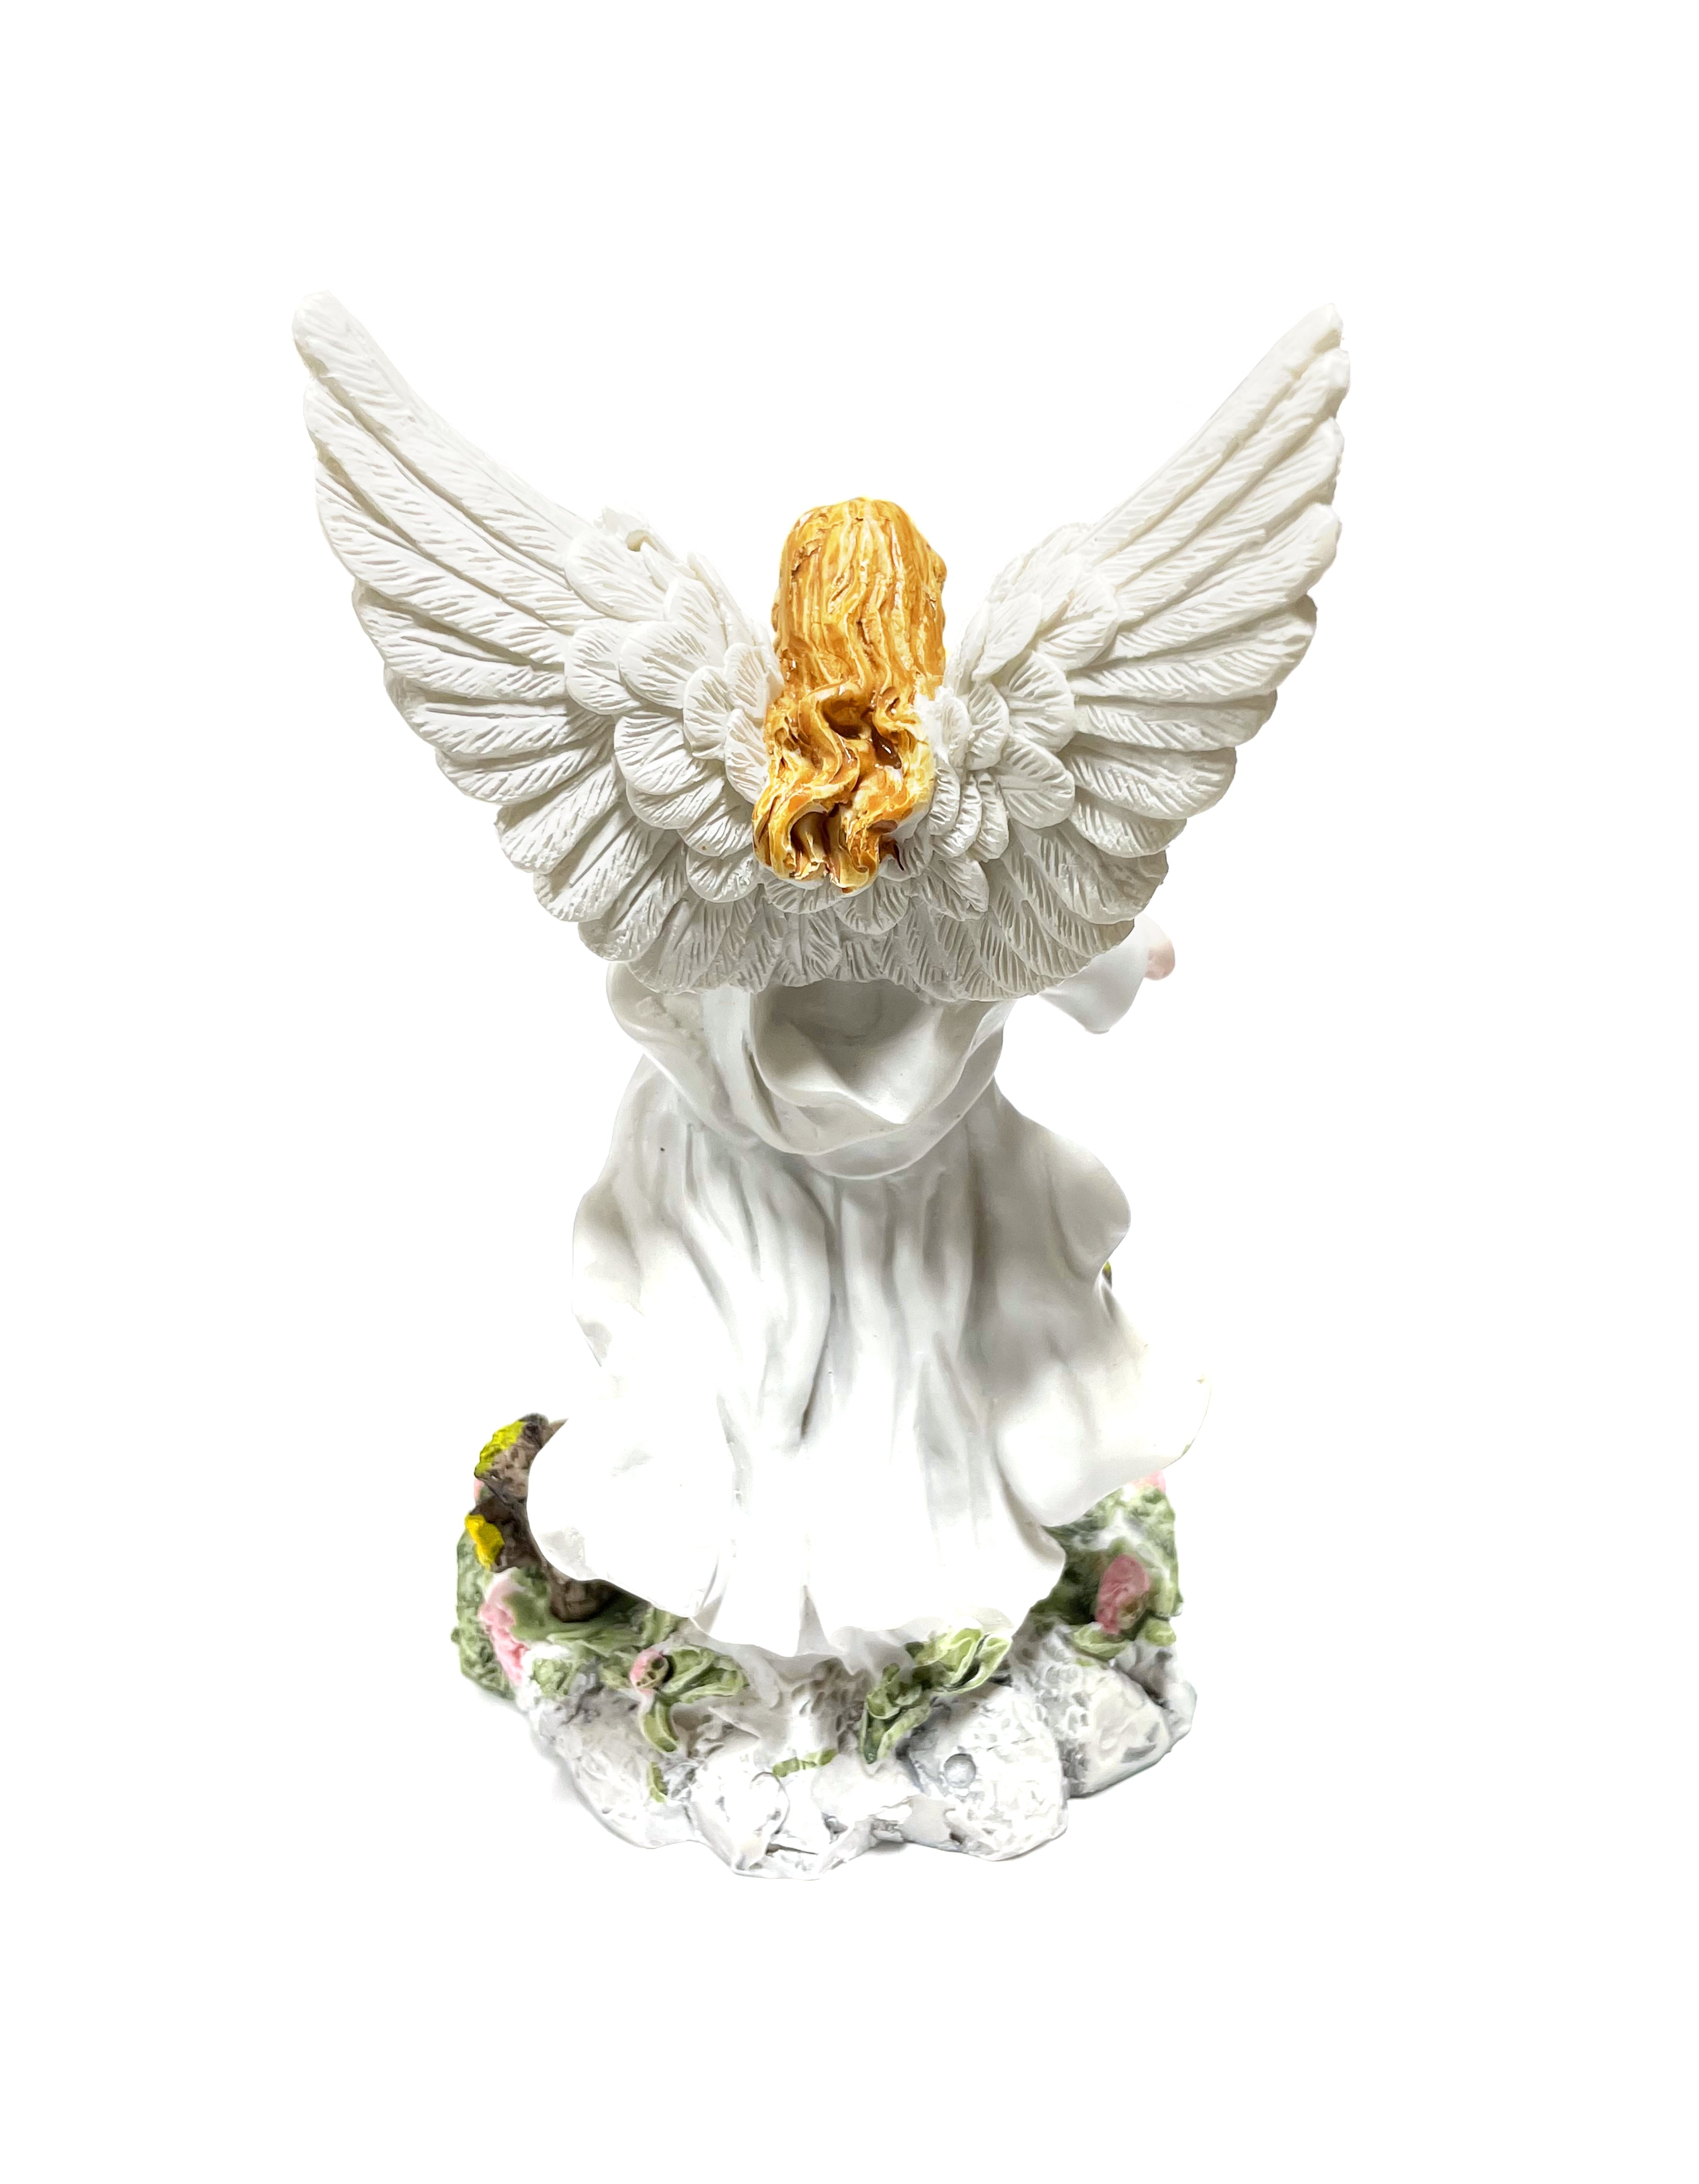 Religious statue of the Guardian Angel 5" height